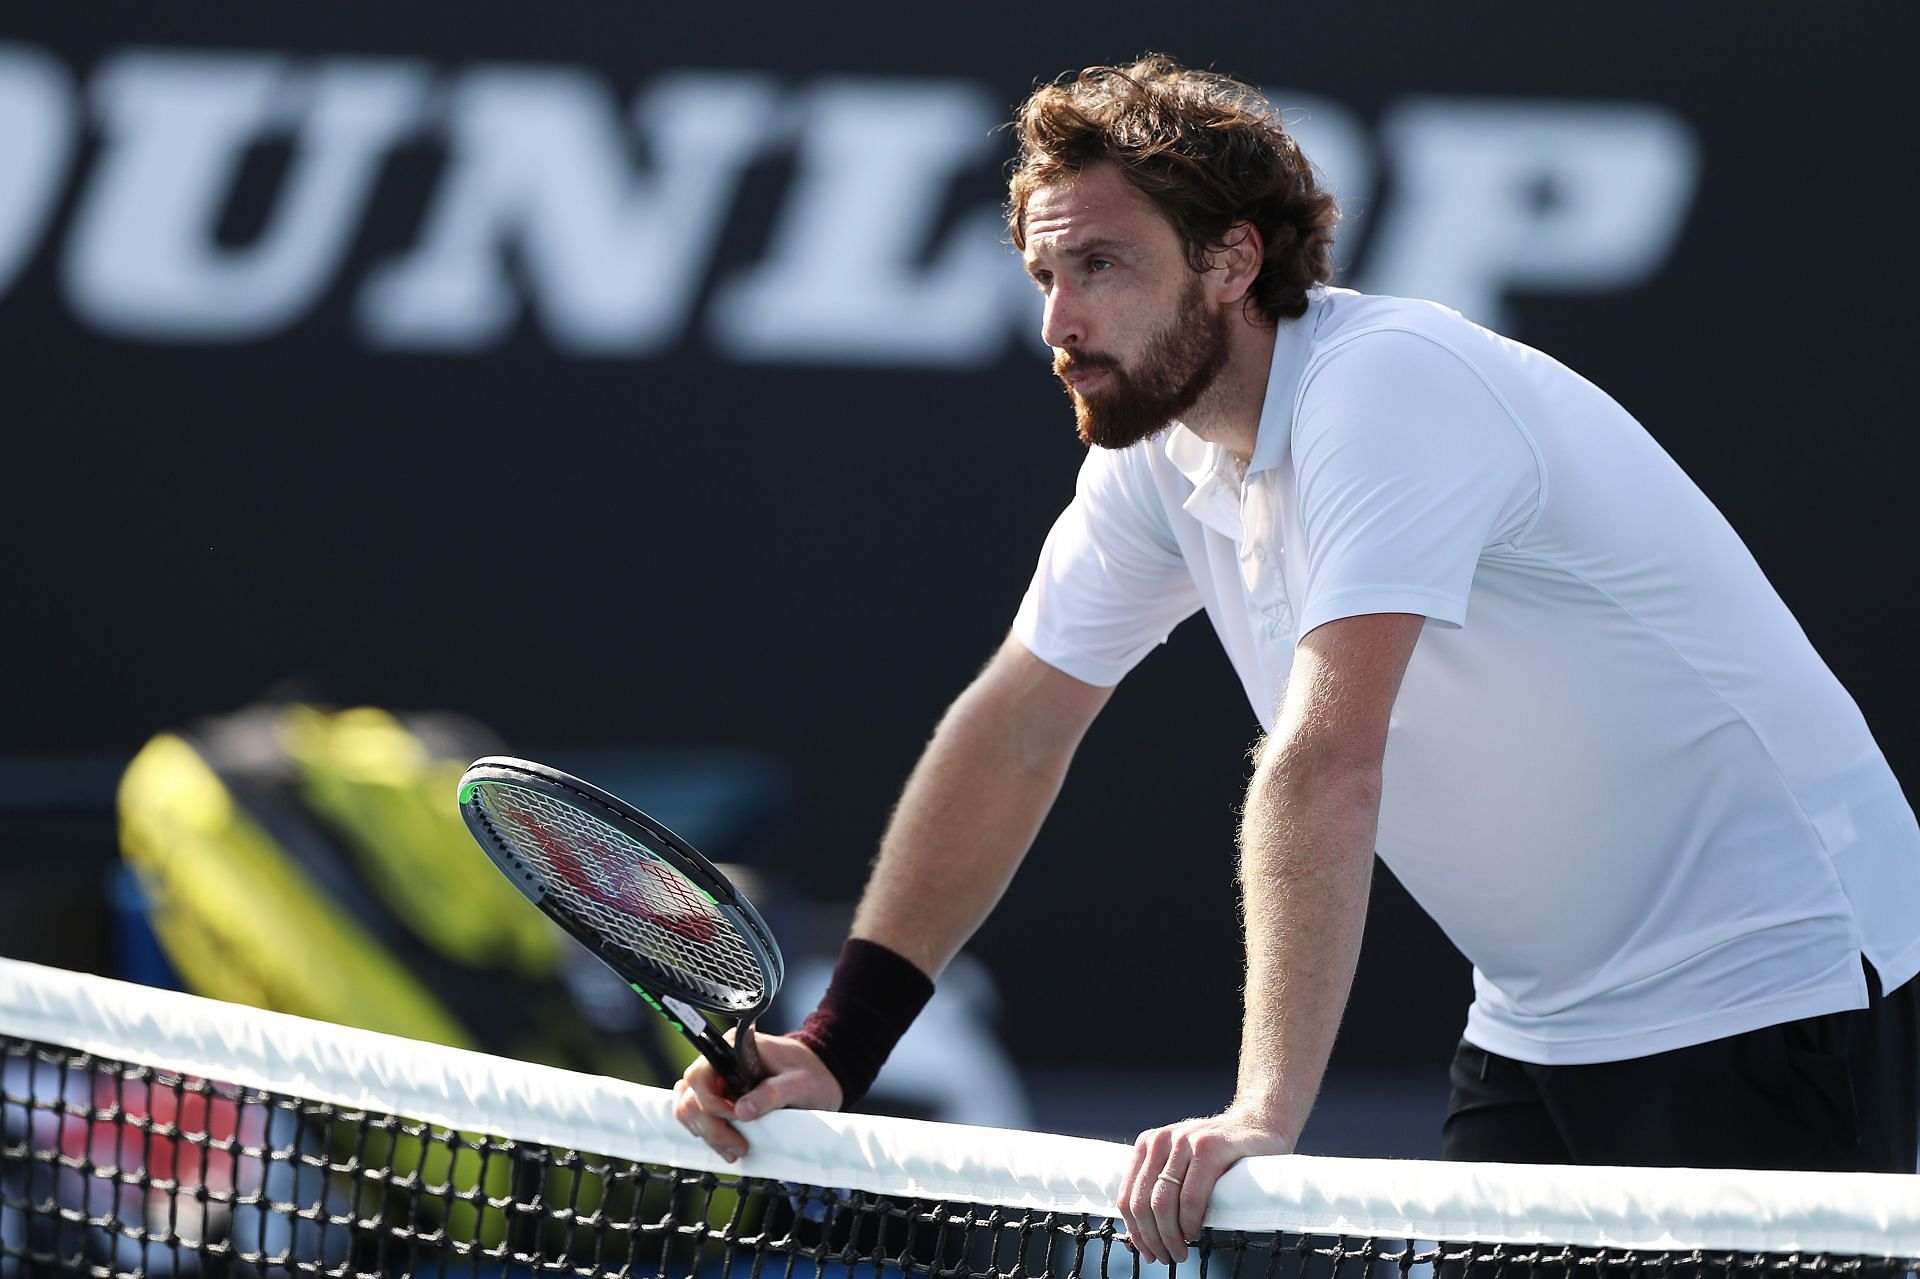 Ernests Gulbis at the 2020 Australian Open